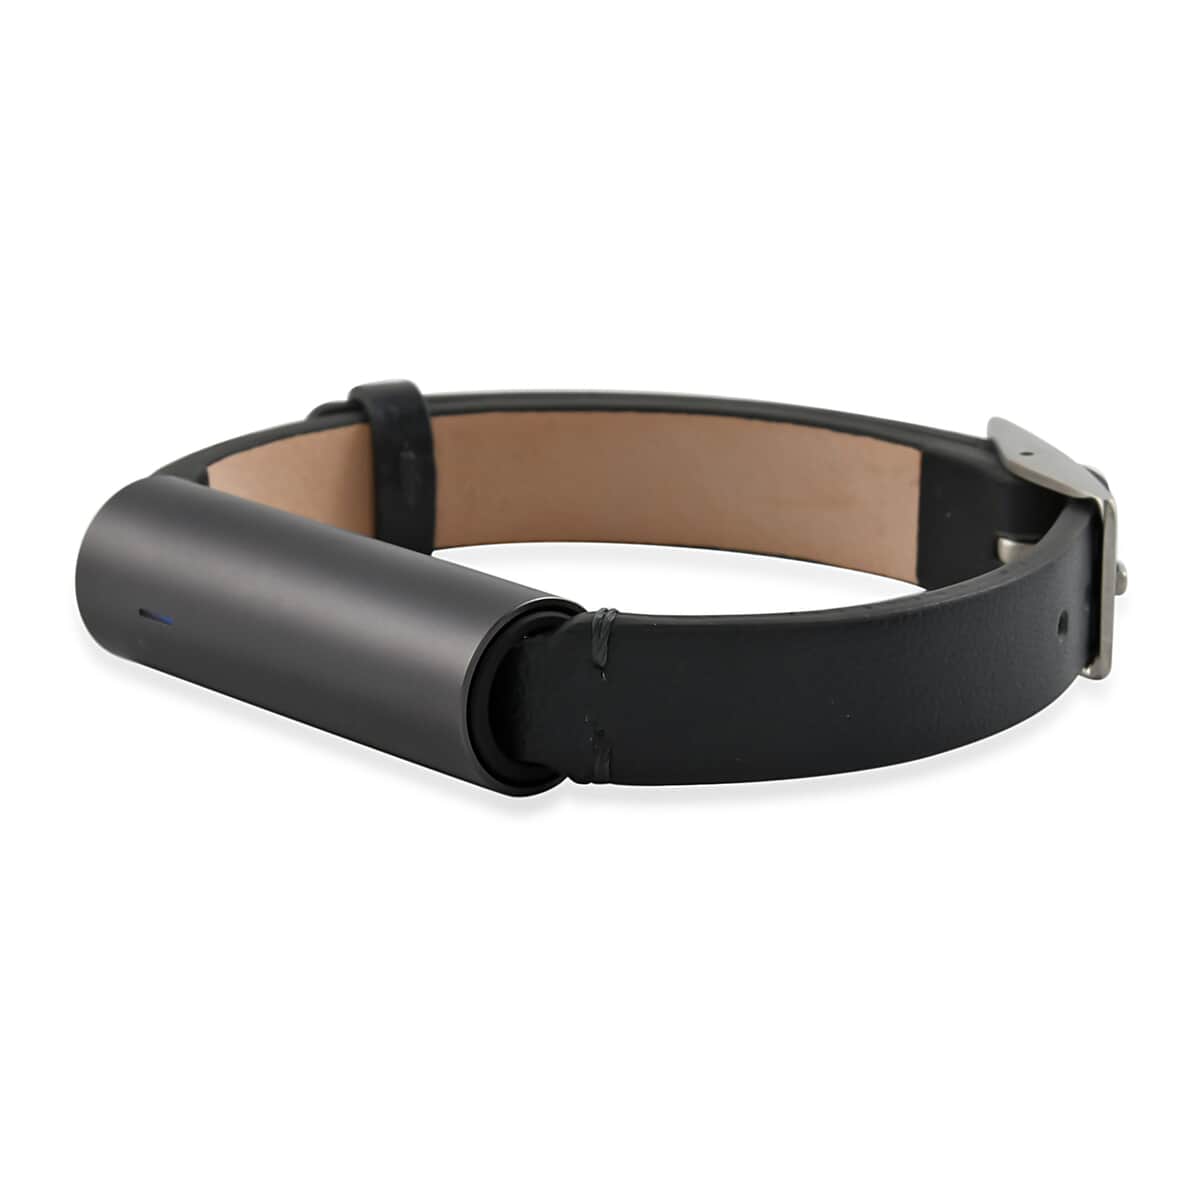 Misfit Ray Fitness and Sleep Tracker with Black Leather Band -Carbon Black image number 0